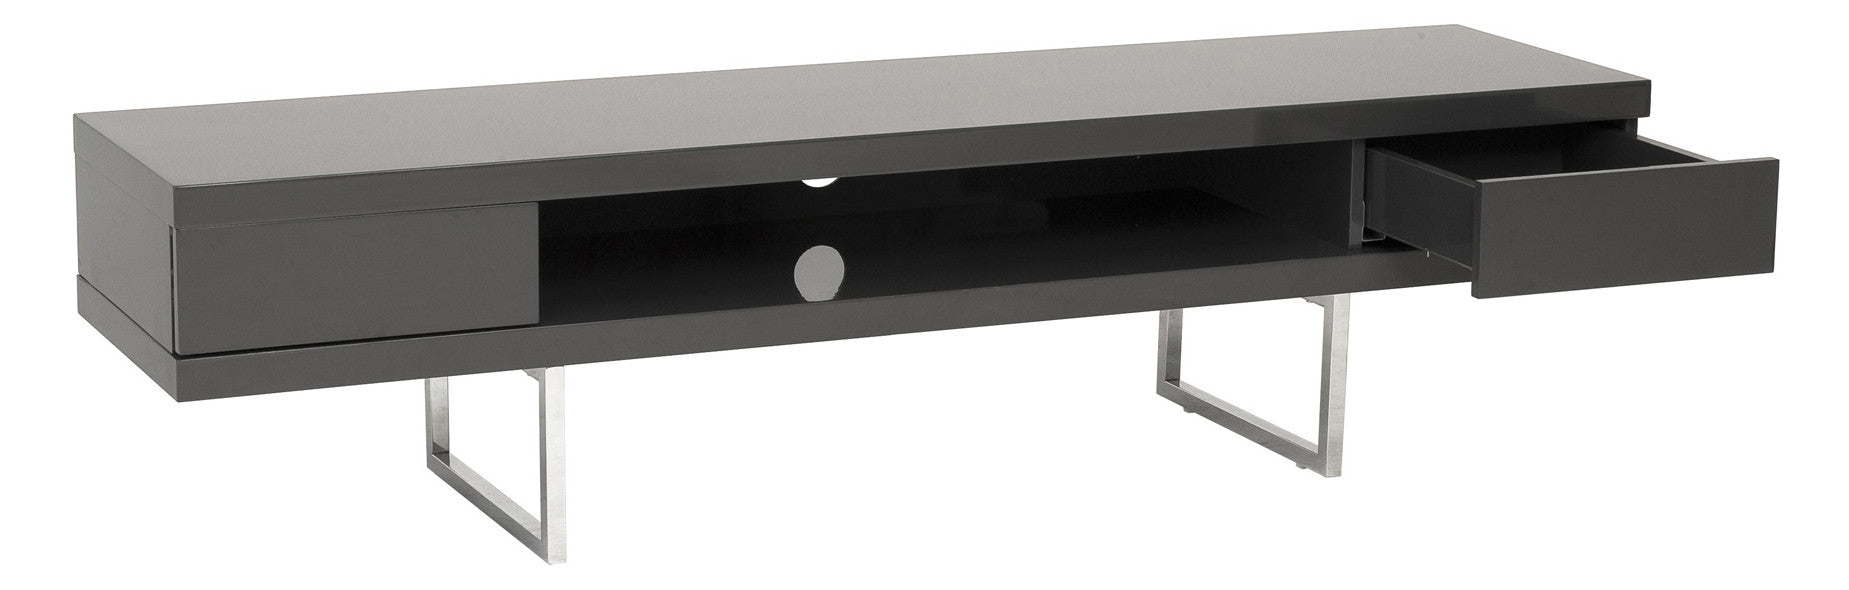 Mirabell Media Stand Gray Lacquer